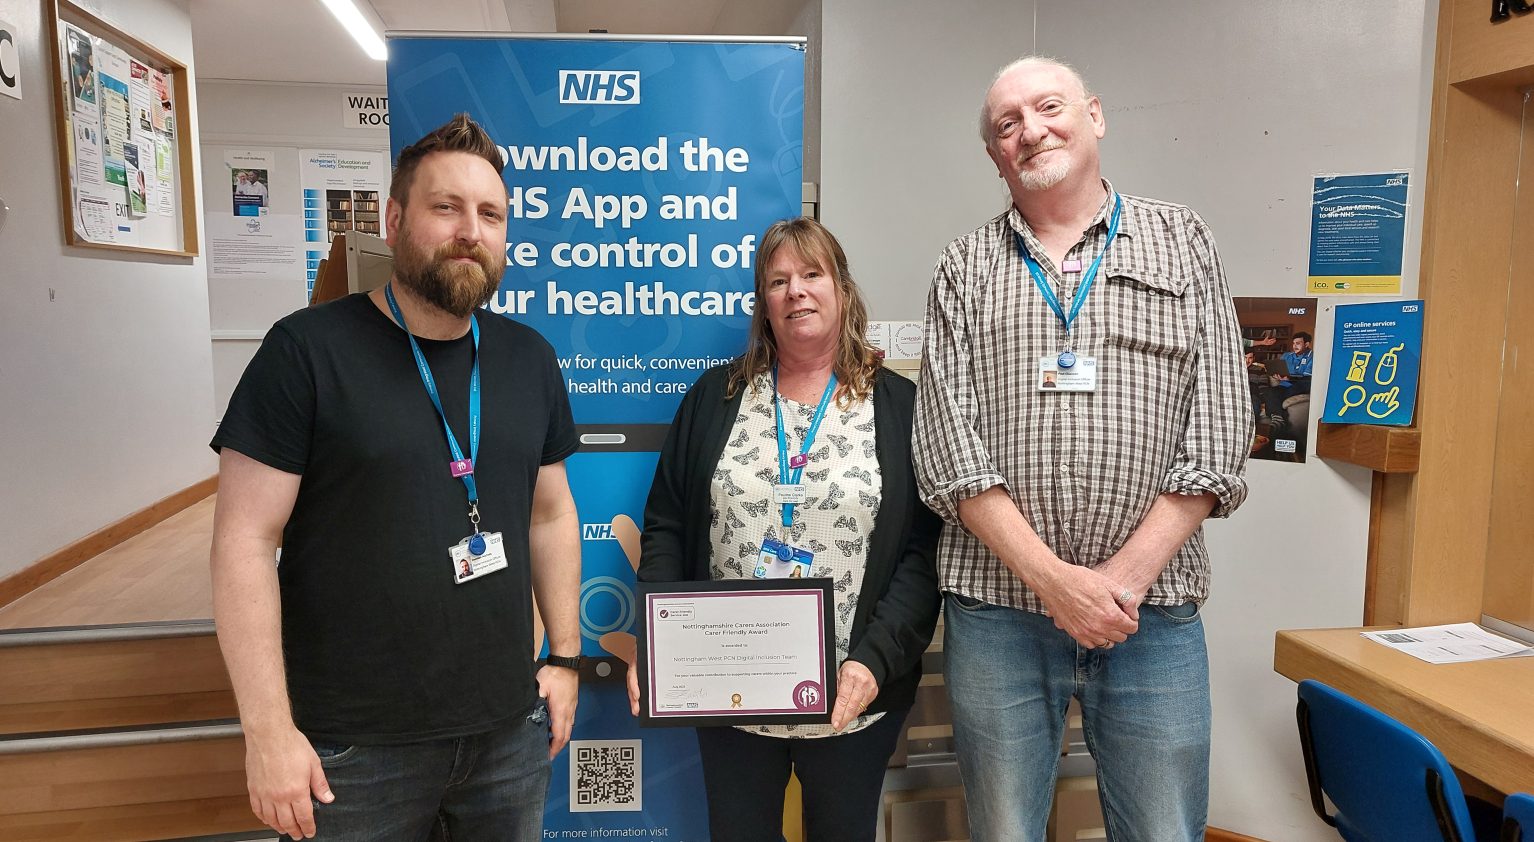 Three people stood infront of pull up banner showing award certificate